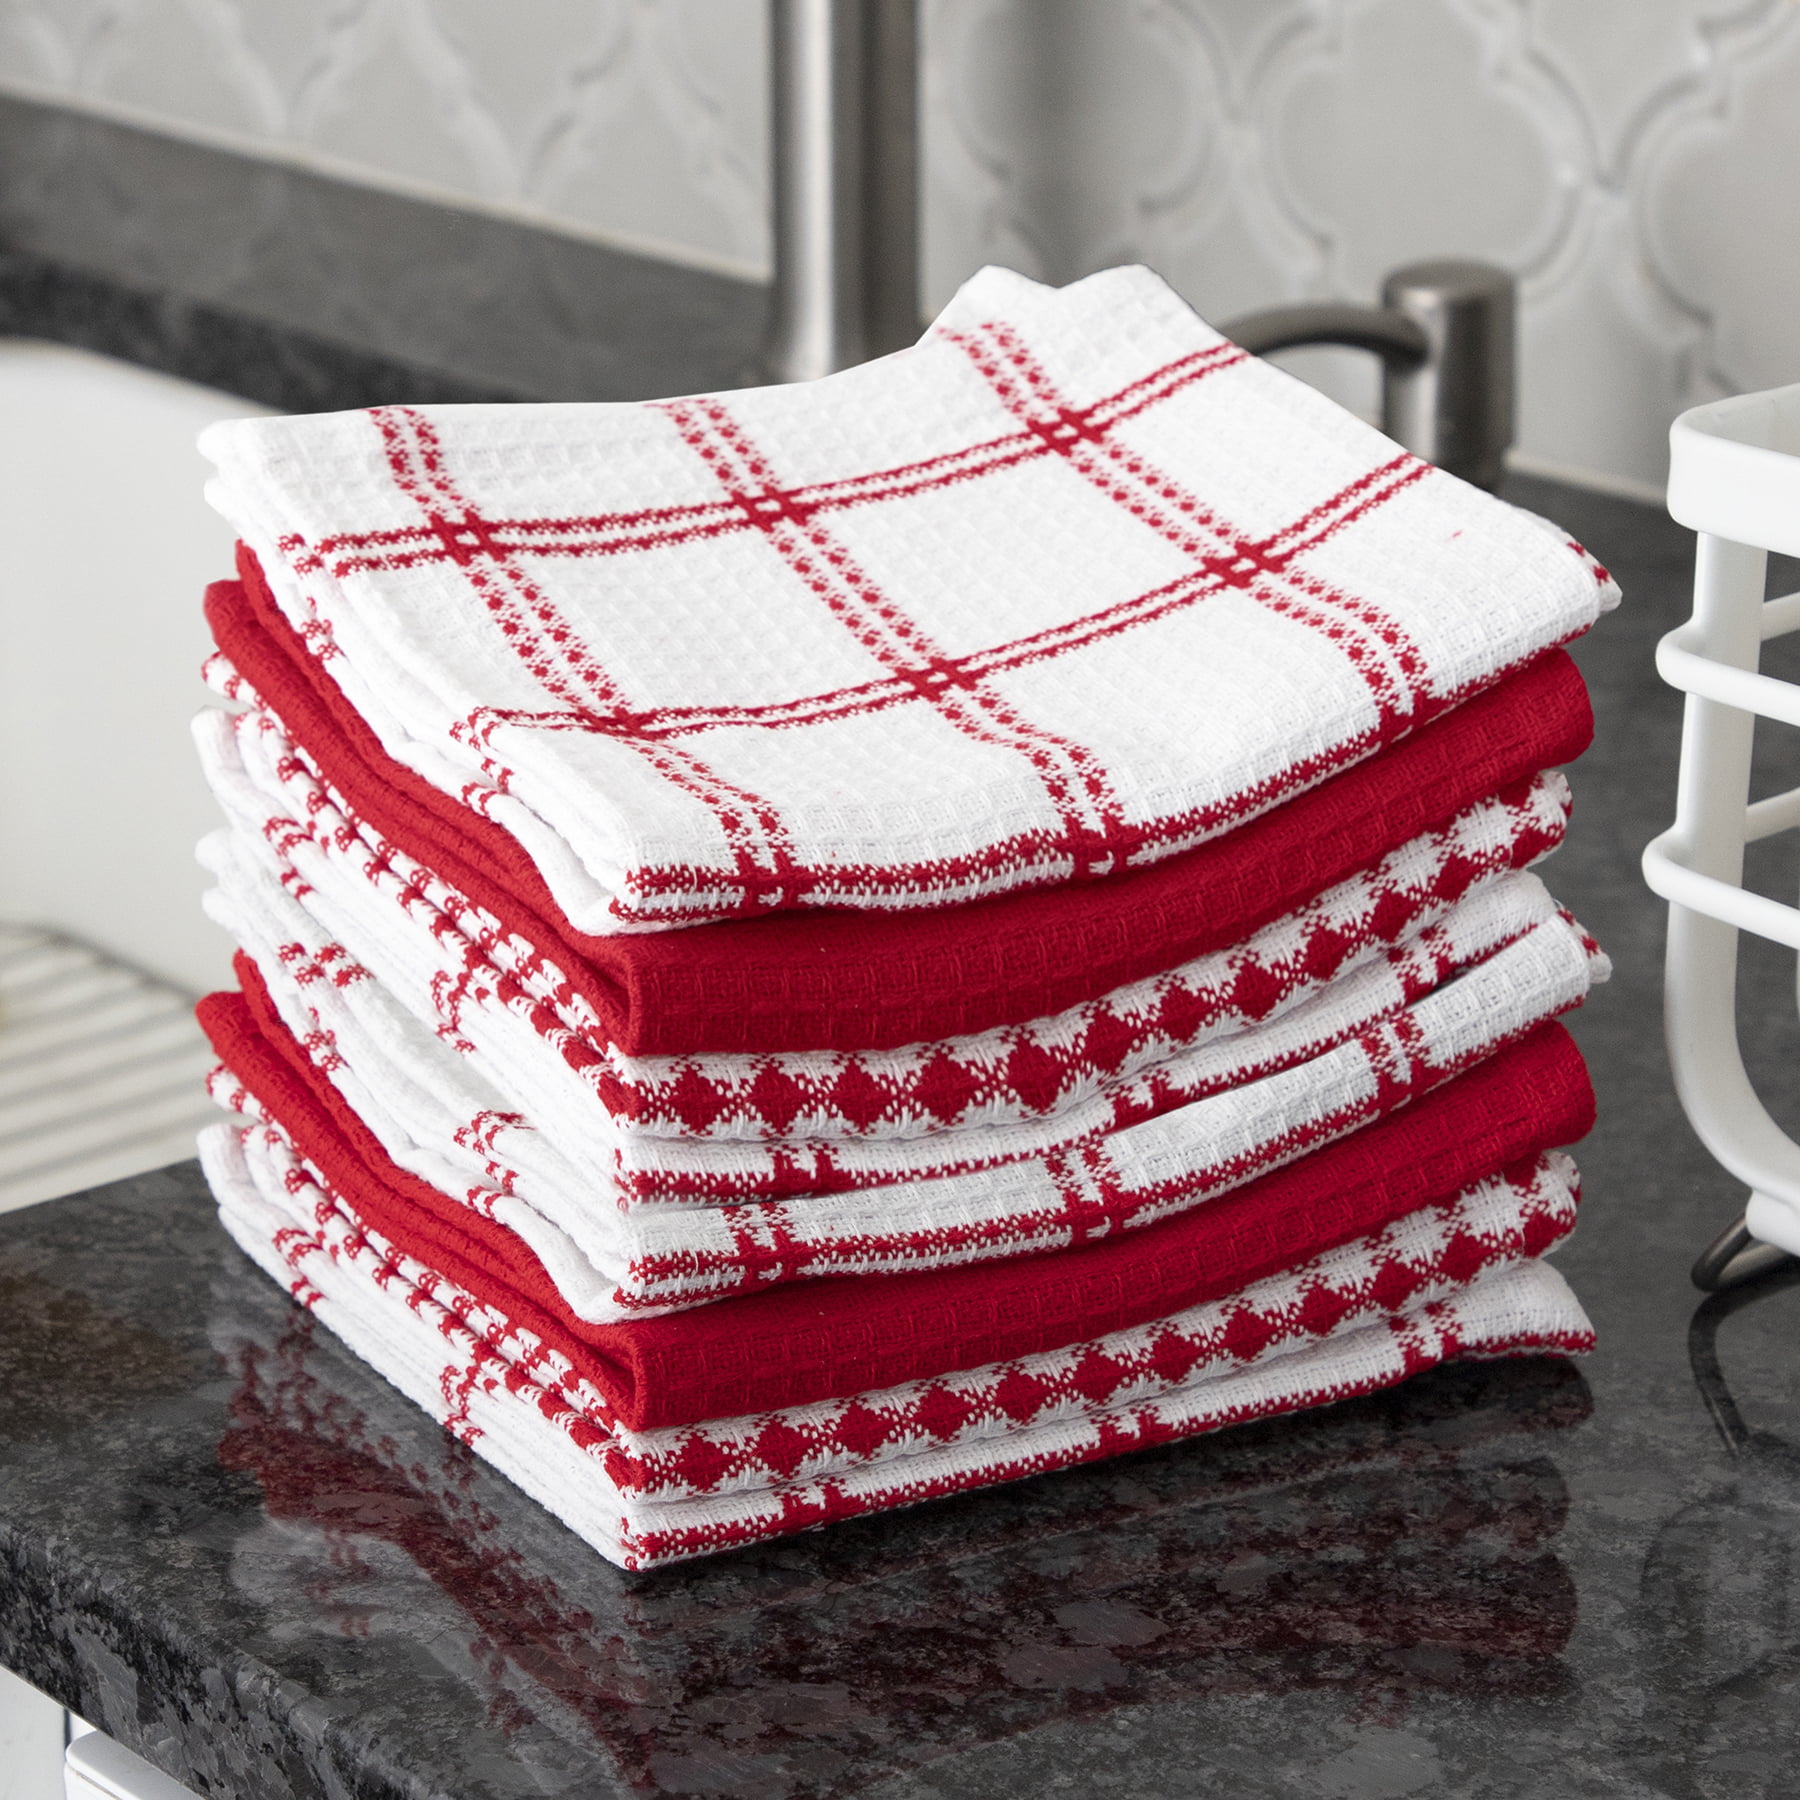 Choice 15 Flame Retardant Oven Mitts and Waffle-Weave Kitchen Towel and  Dish Cloth Kit